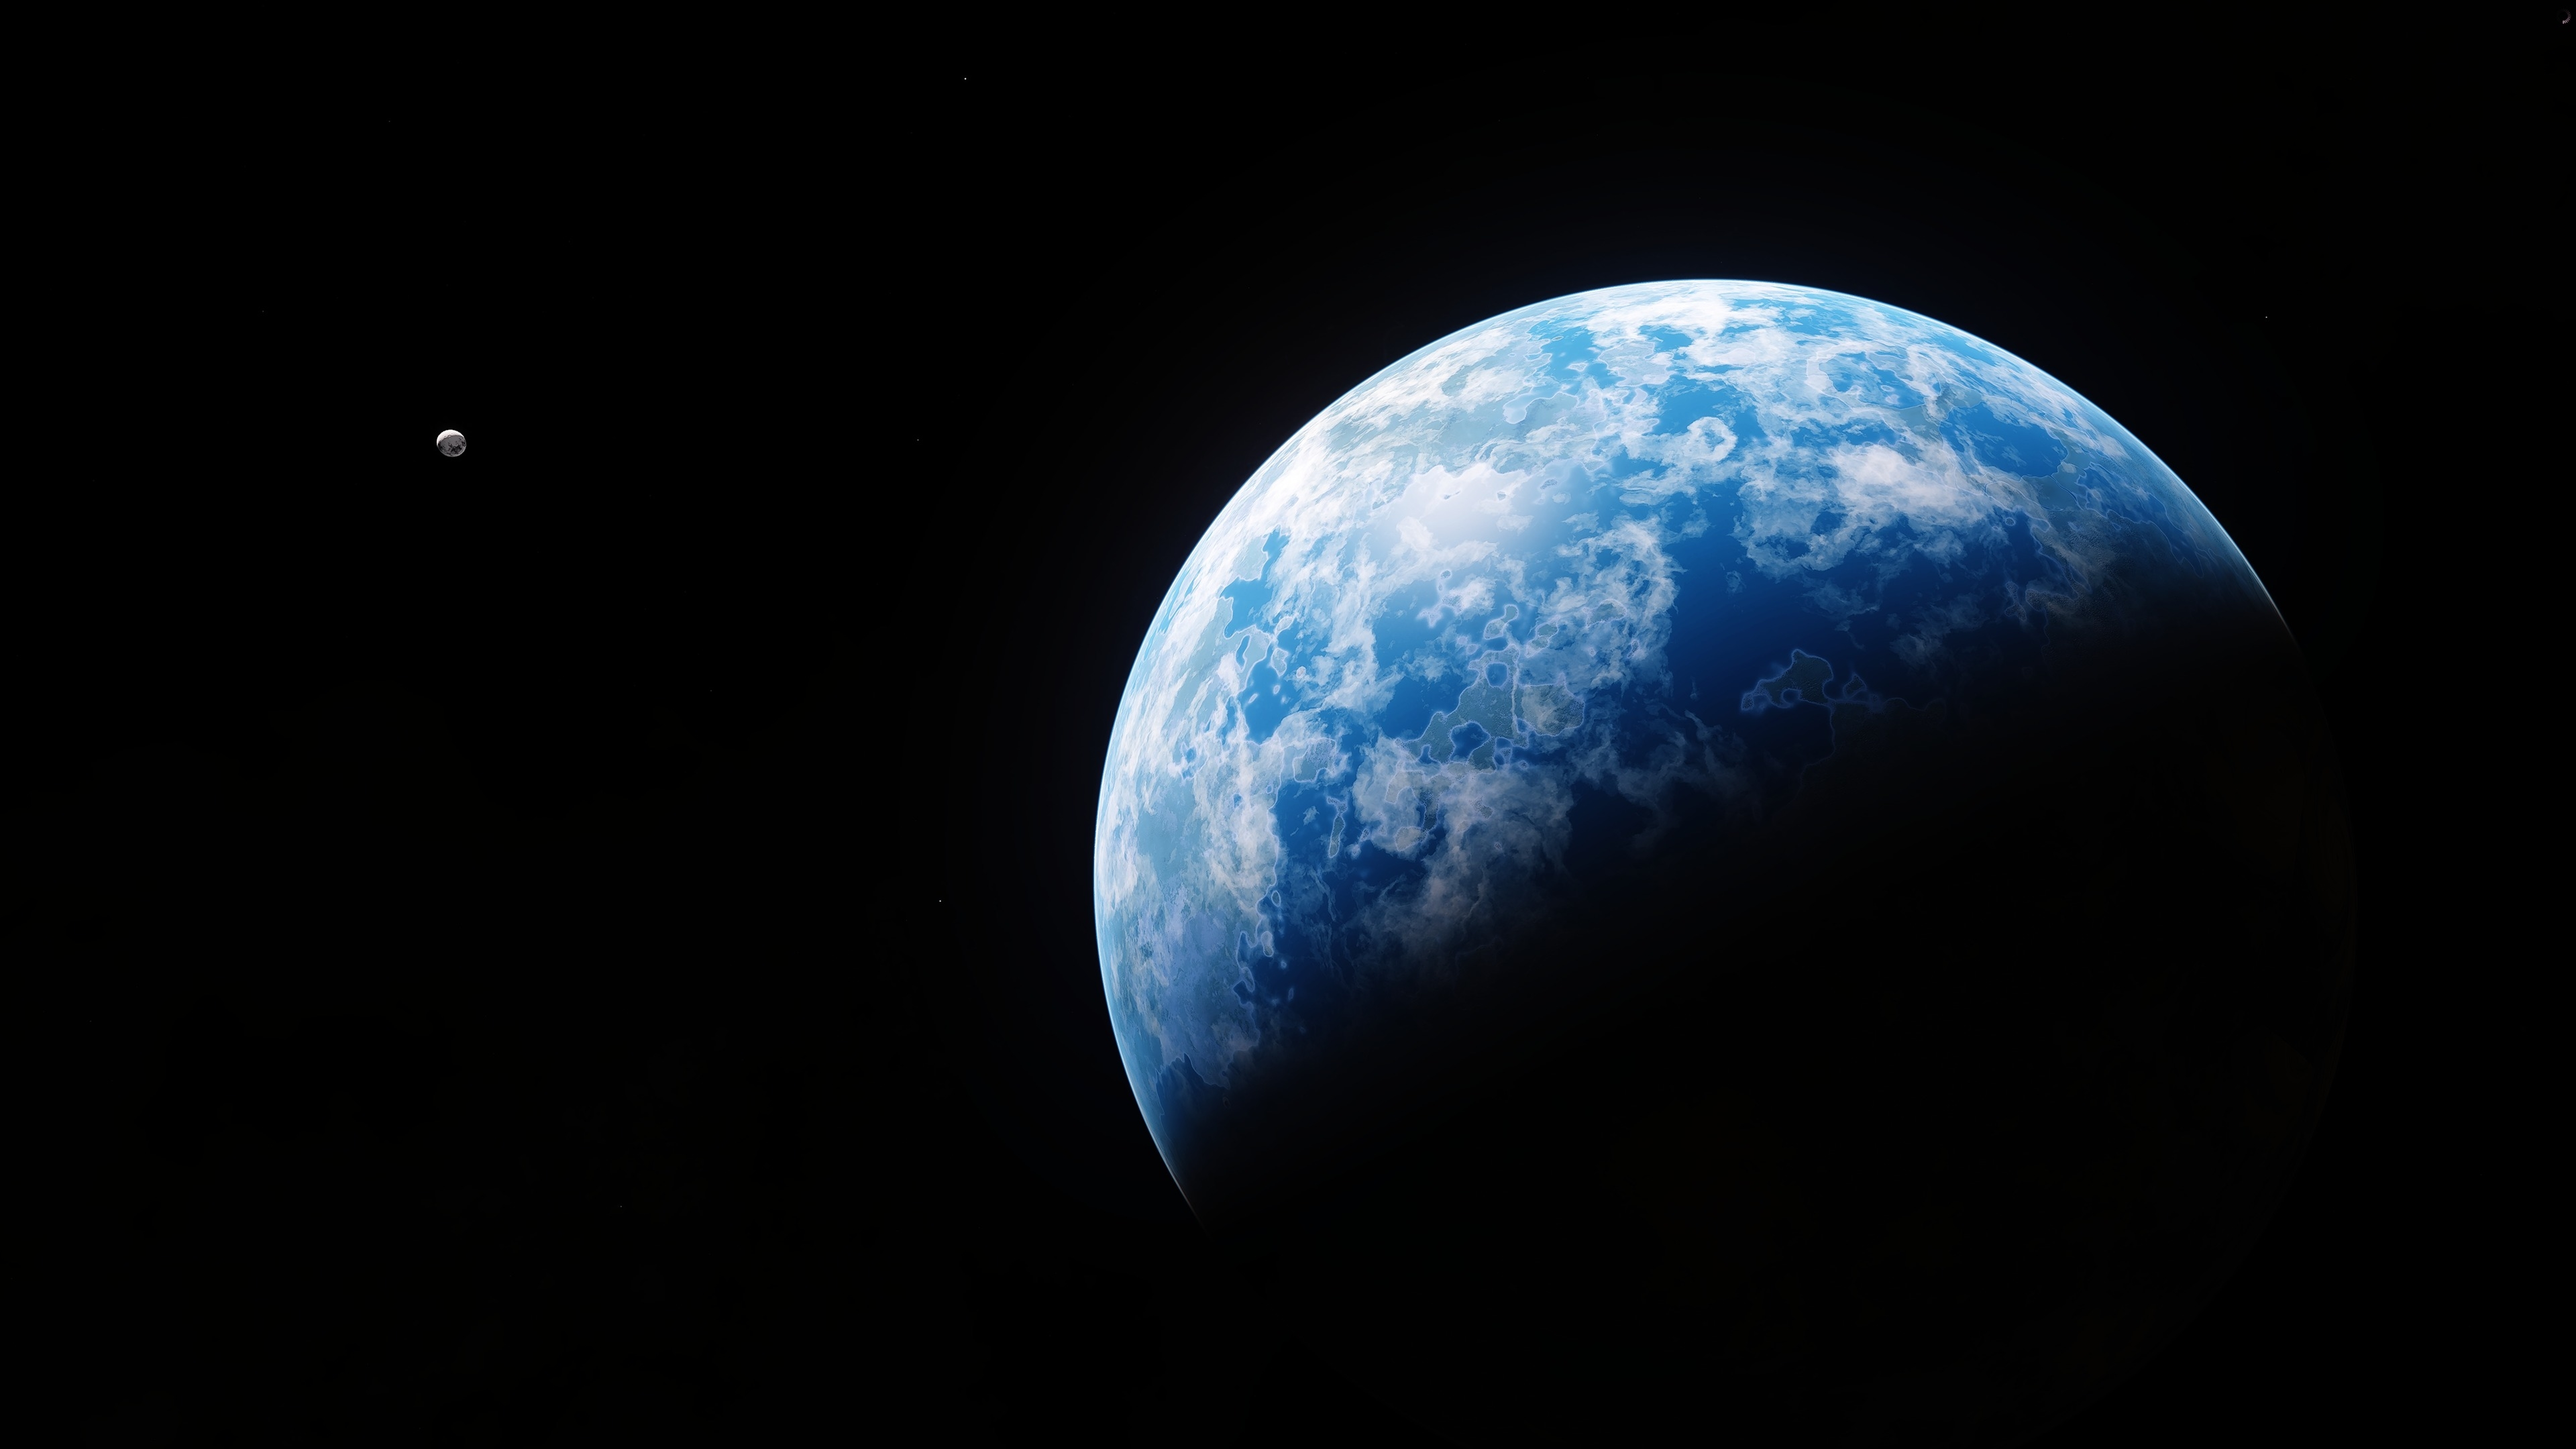 sci-fi planet picture 8K and 4K Ultra HD 7680x4320 3840x2160 Stock Photo -  Alamy